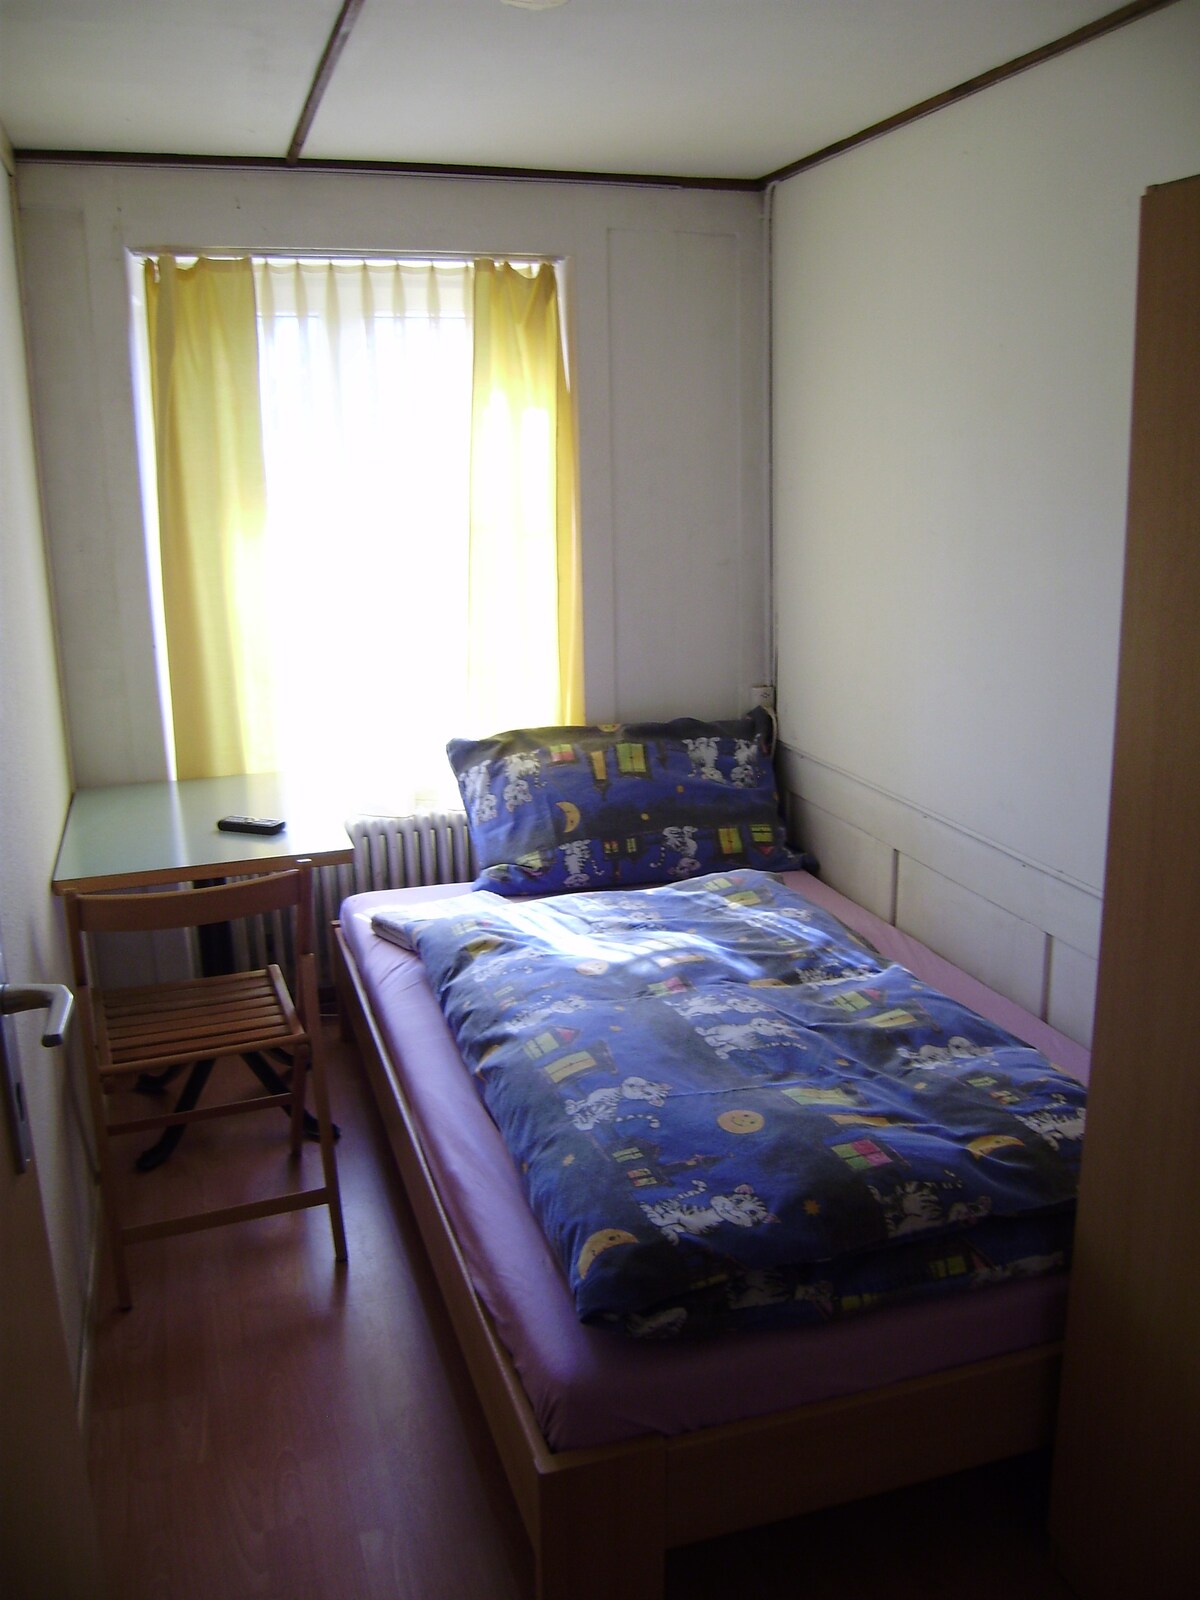 Room fully furnished